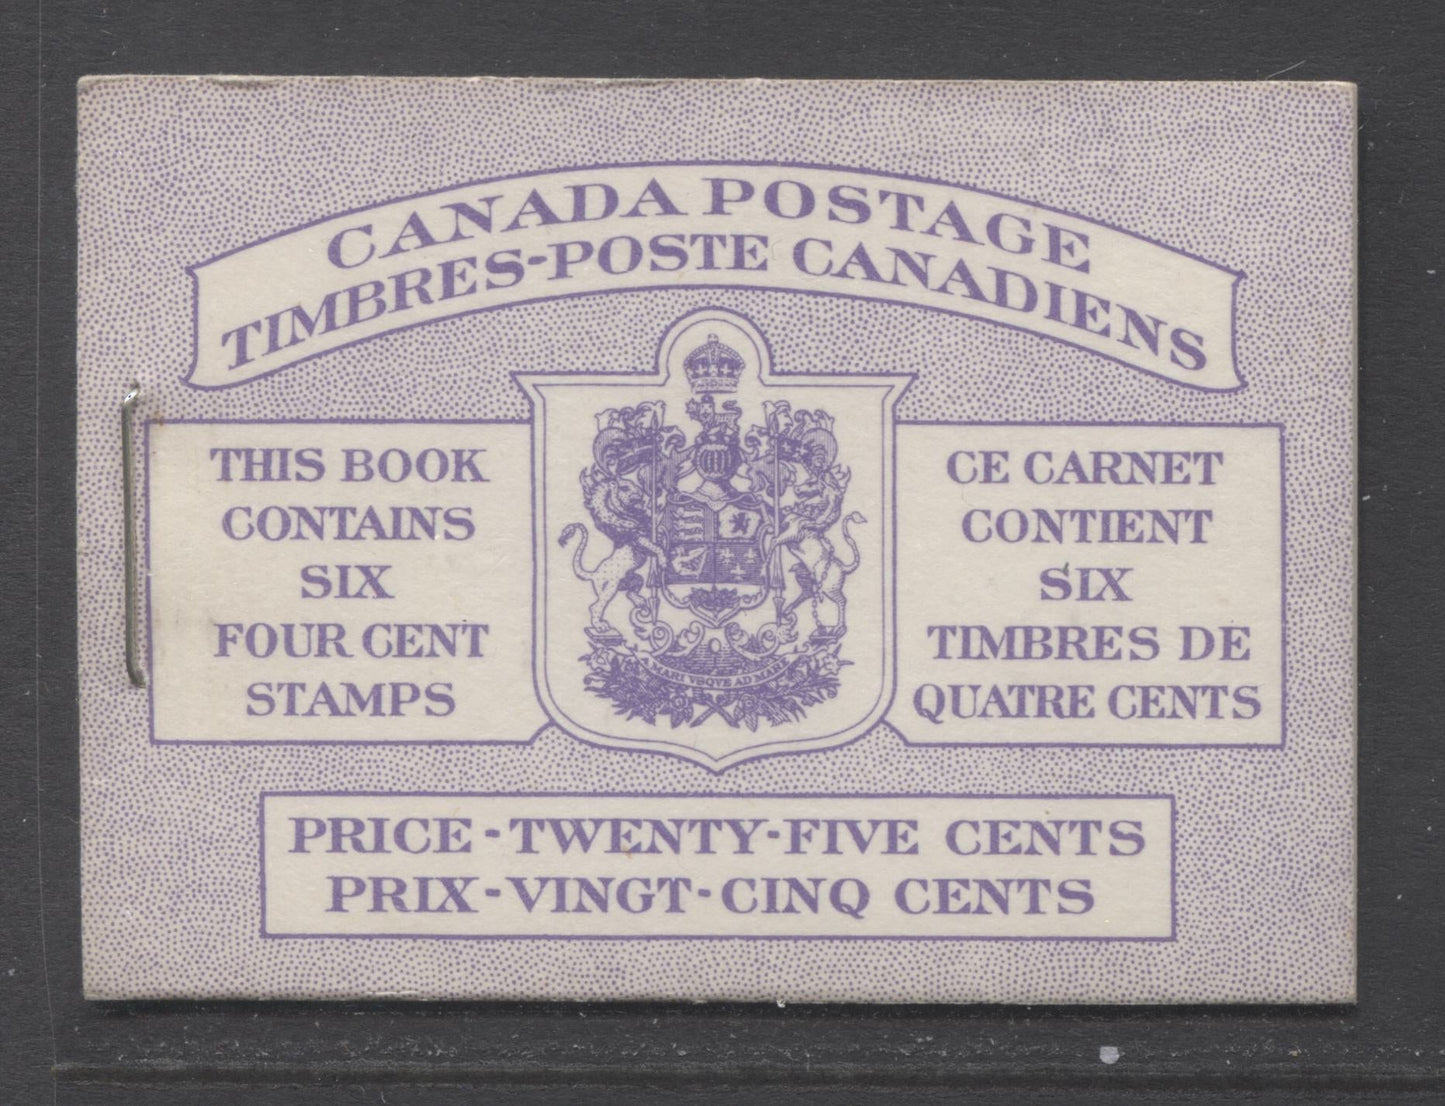 Lot 279 Canada #BK50 1954-1962 Wilding Issue, Complete 25c Bilingual Booklet, No Rate Page, 16 mm Staple, Ribbed Paper, Type 1 Covers, Front Cover IIIE, Cutting Guideline On Back Cover Mi, VF